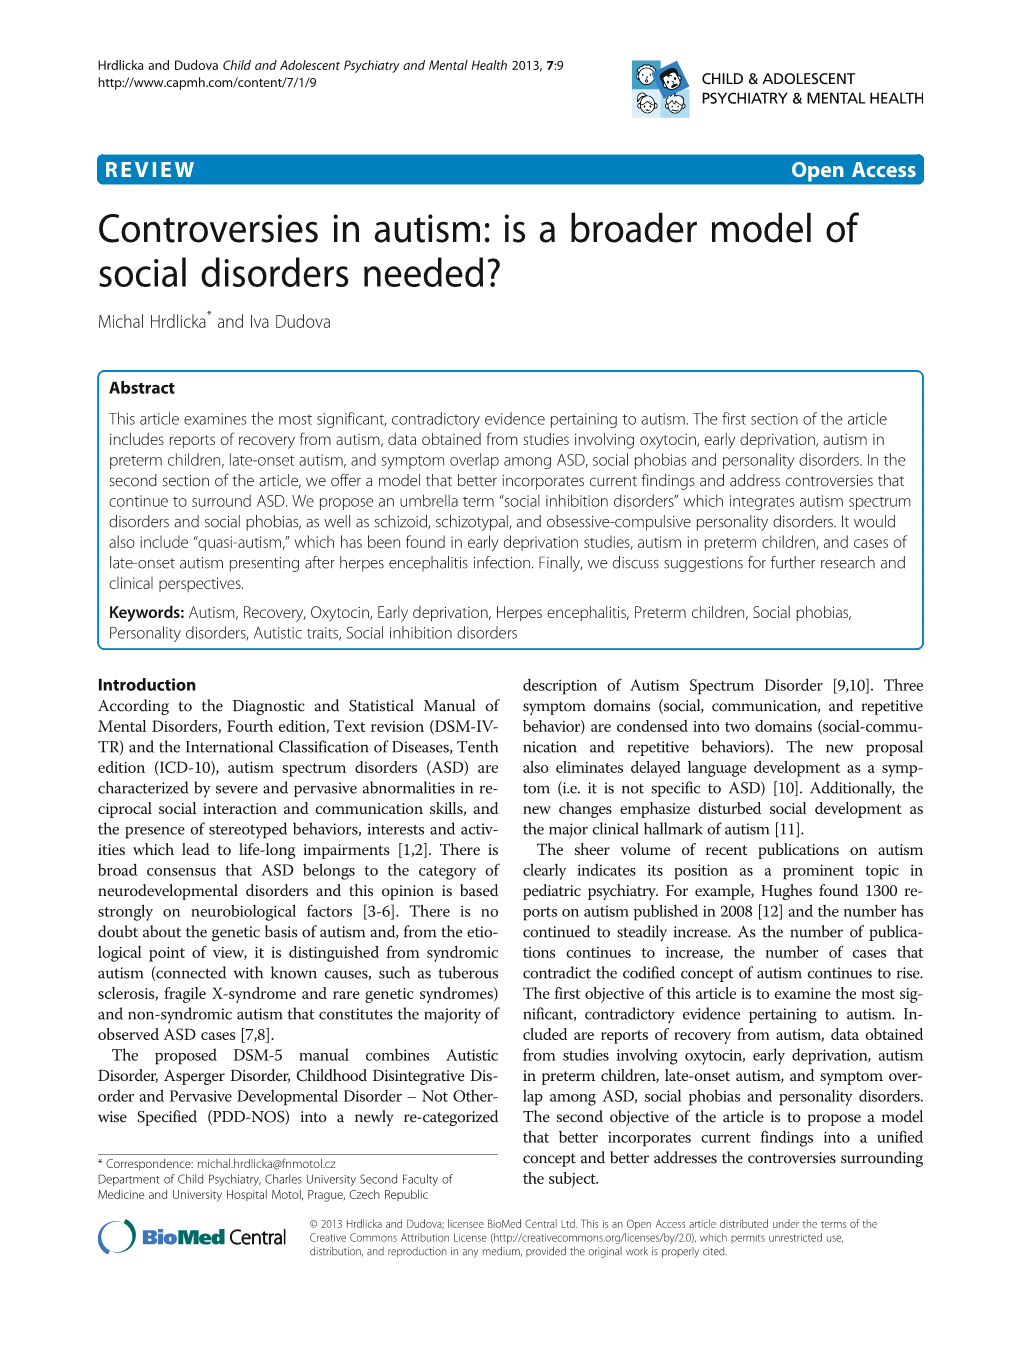 Controversies in Autism: Is a Broader Model of Social Disorders Needed? Michal Hrdlicka* and Iva Dudova